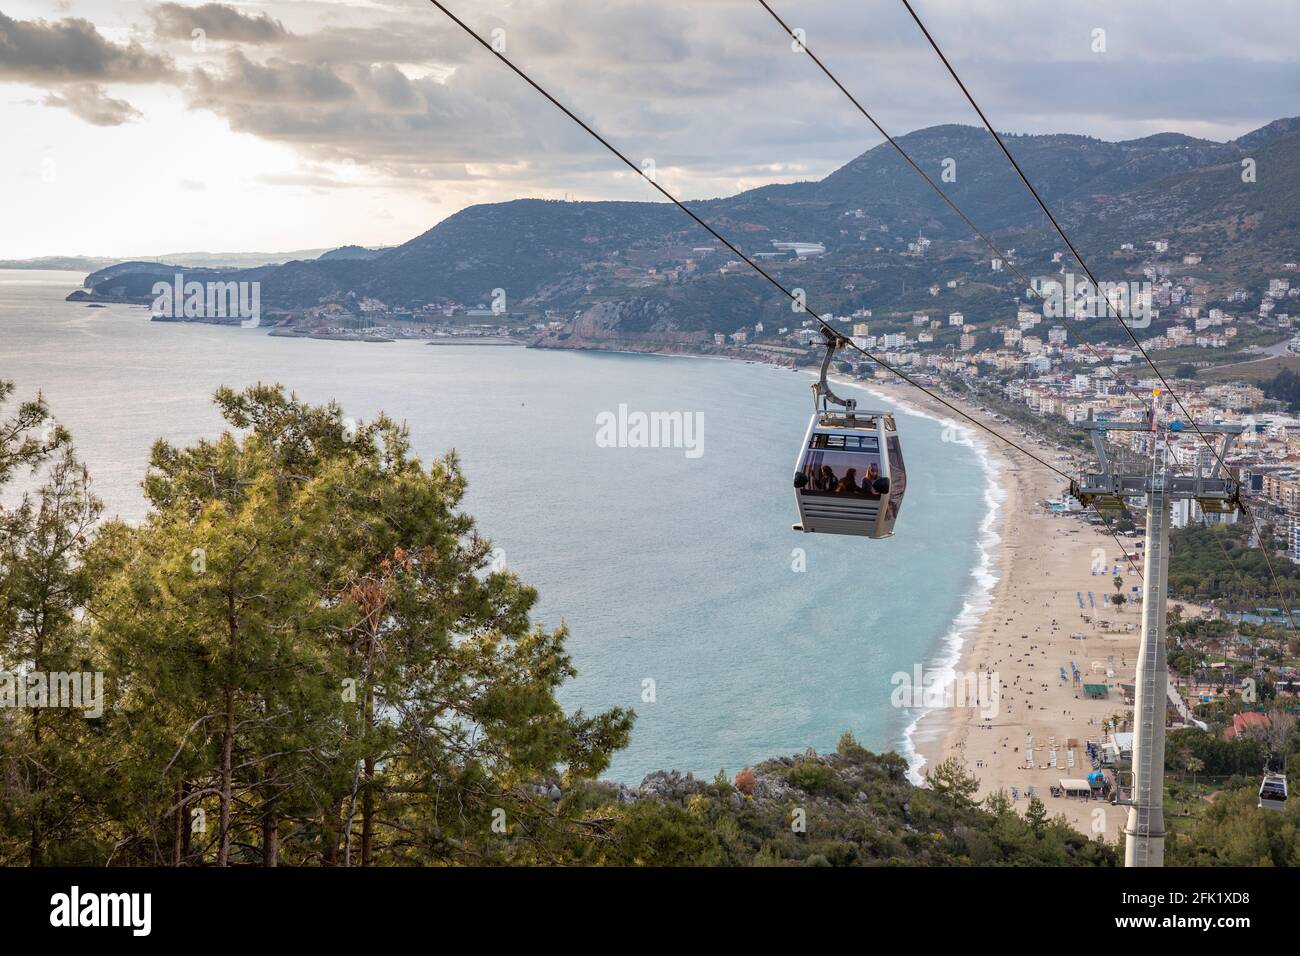 High angle view of the Alanya cable car and Cleopatra Beach in the background in Alanya, Antalya, Turkey on April 3, 2021. Stock Photo